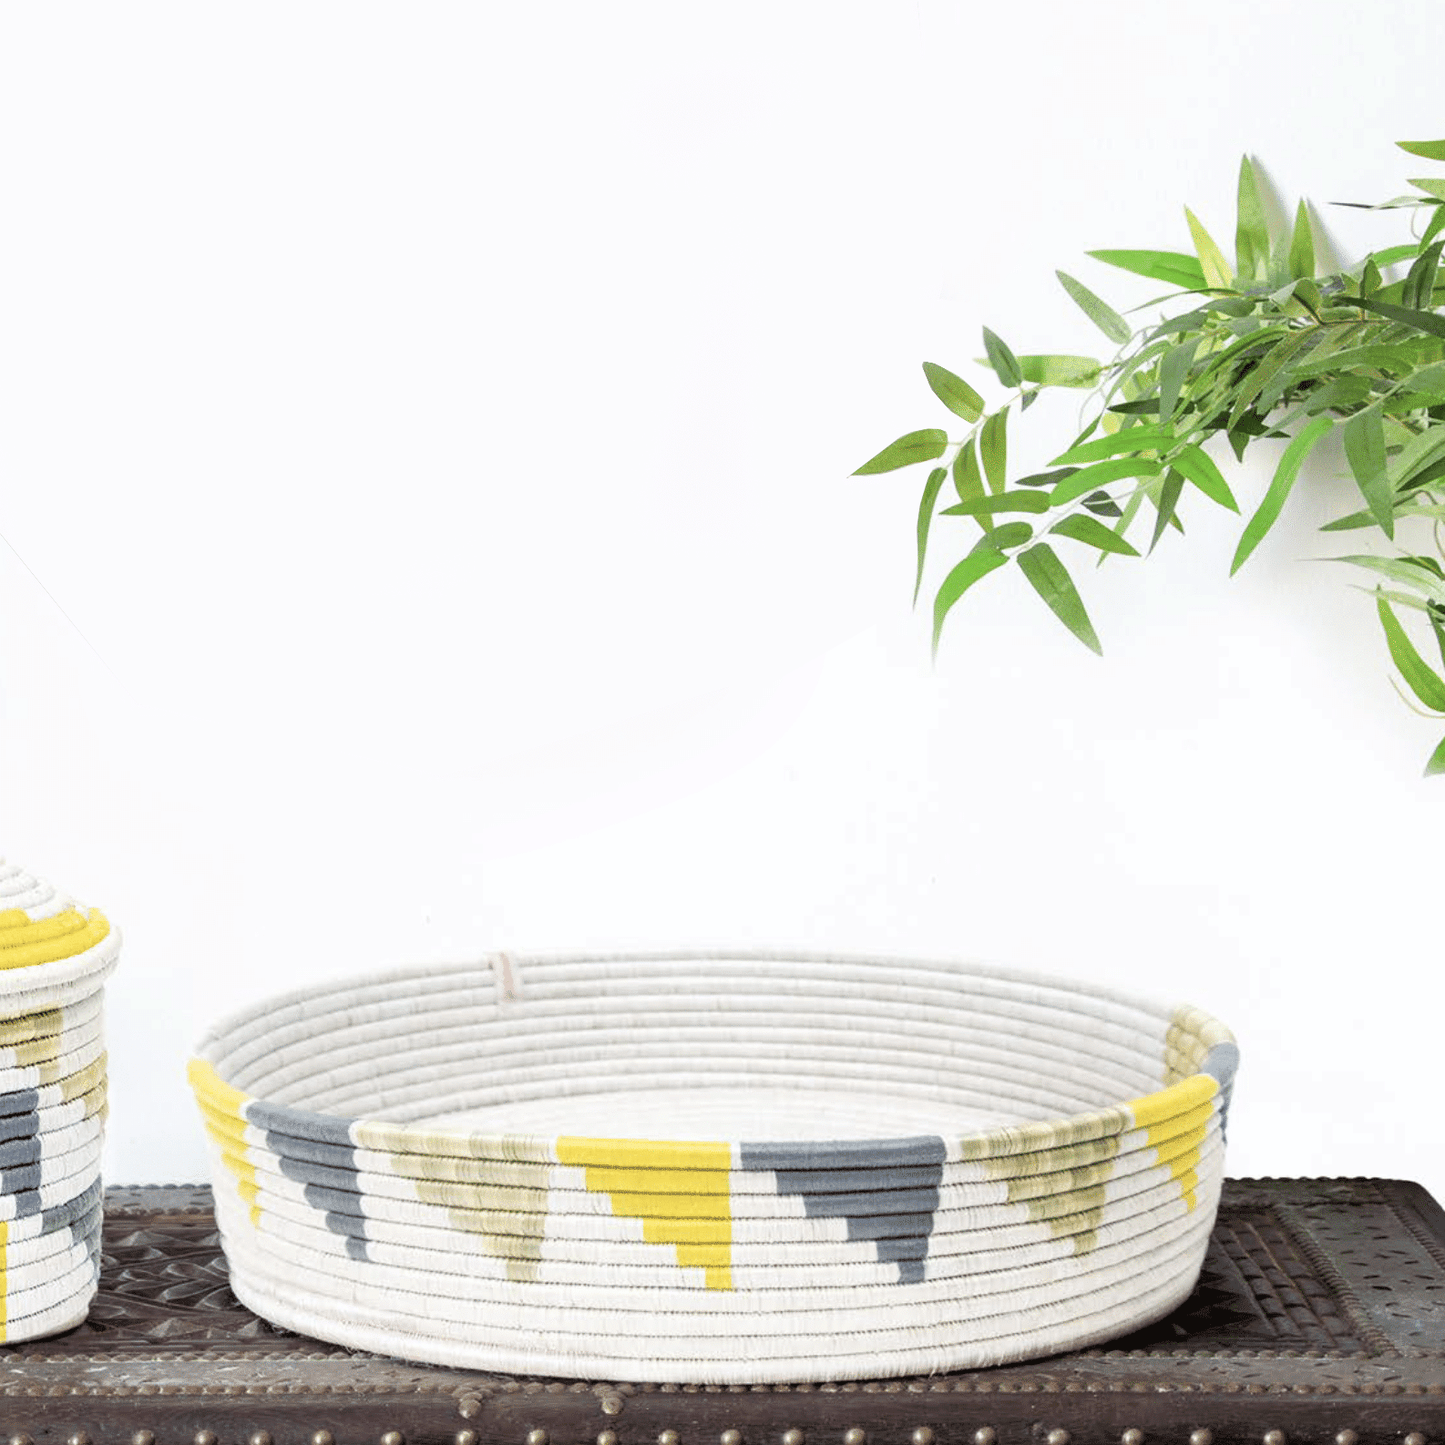 Oval African Tray | Handwoven Grass